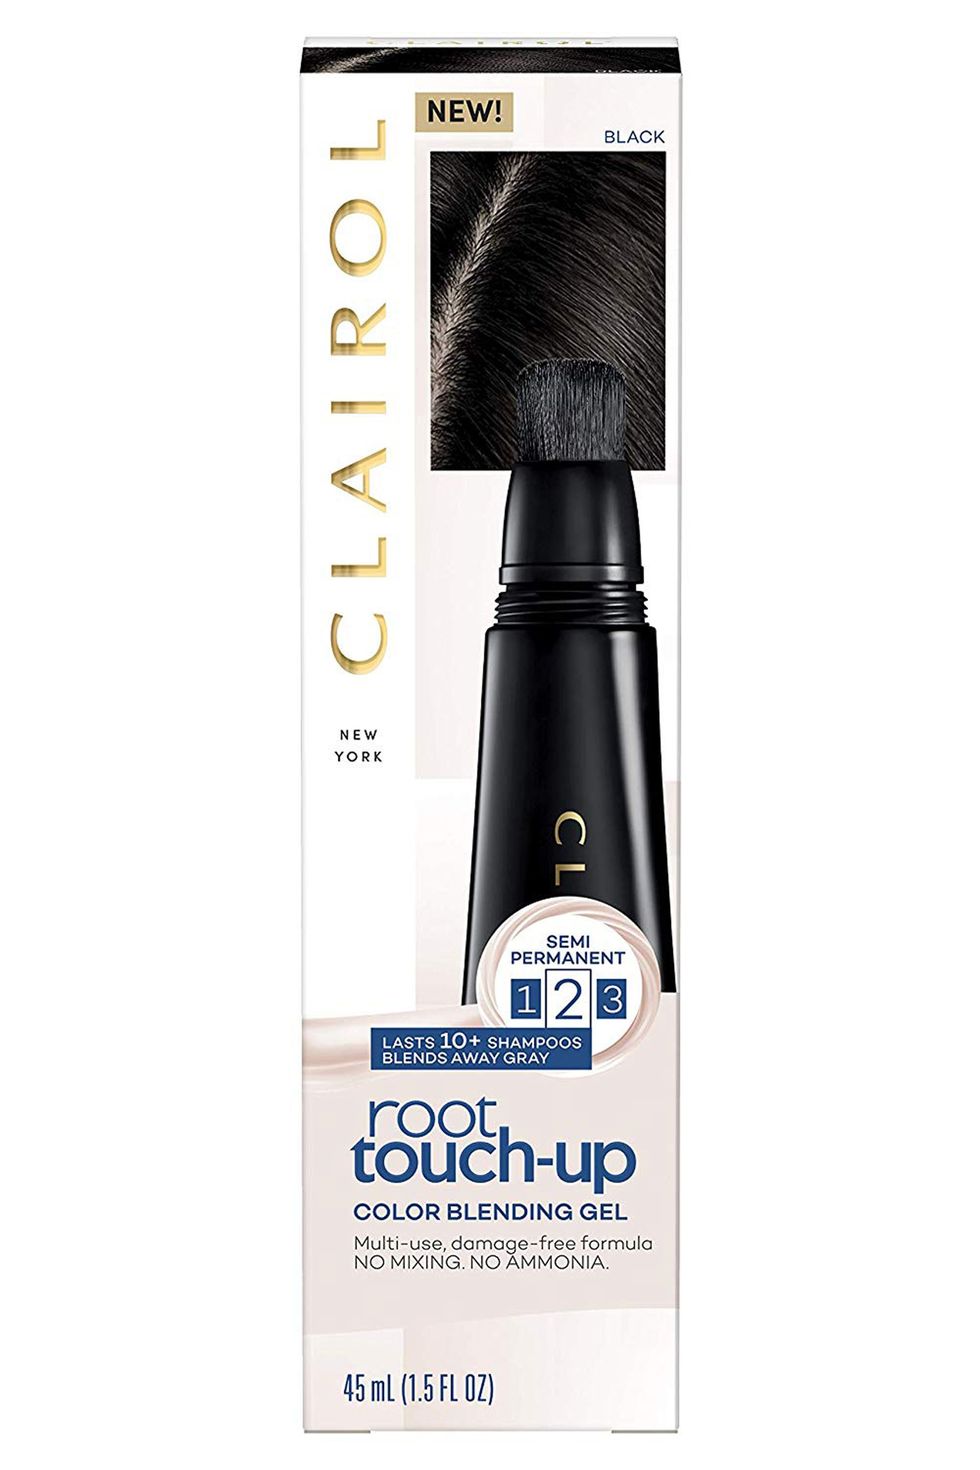 Clairol Root Touch-up, Color Blend Gel 2 Black, 2Count